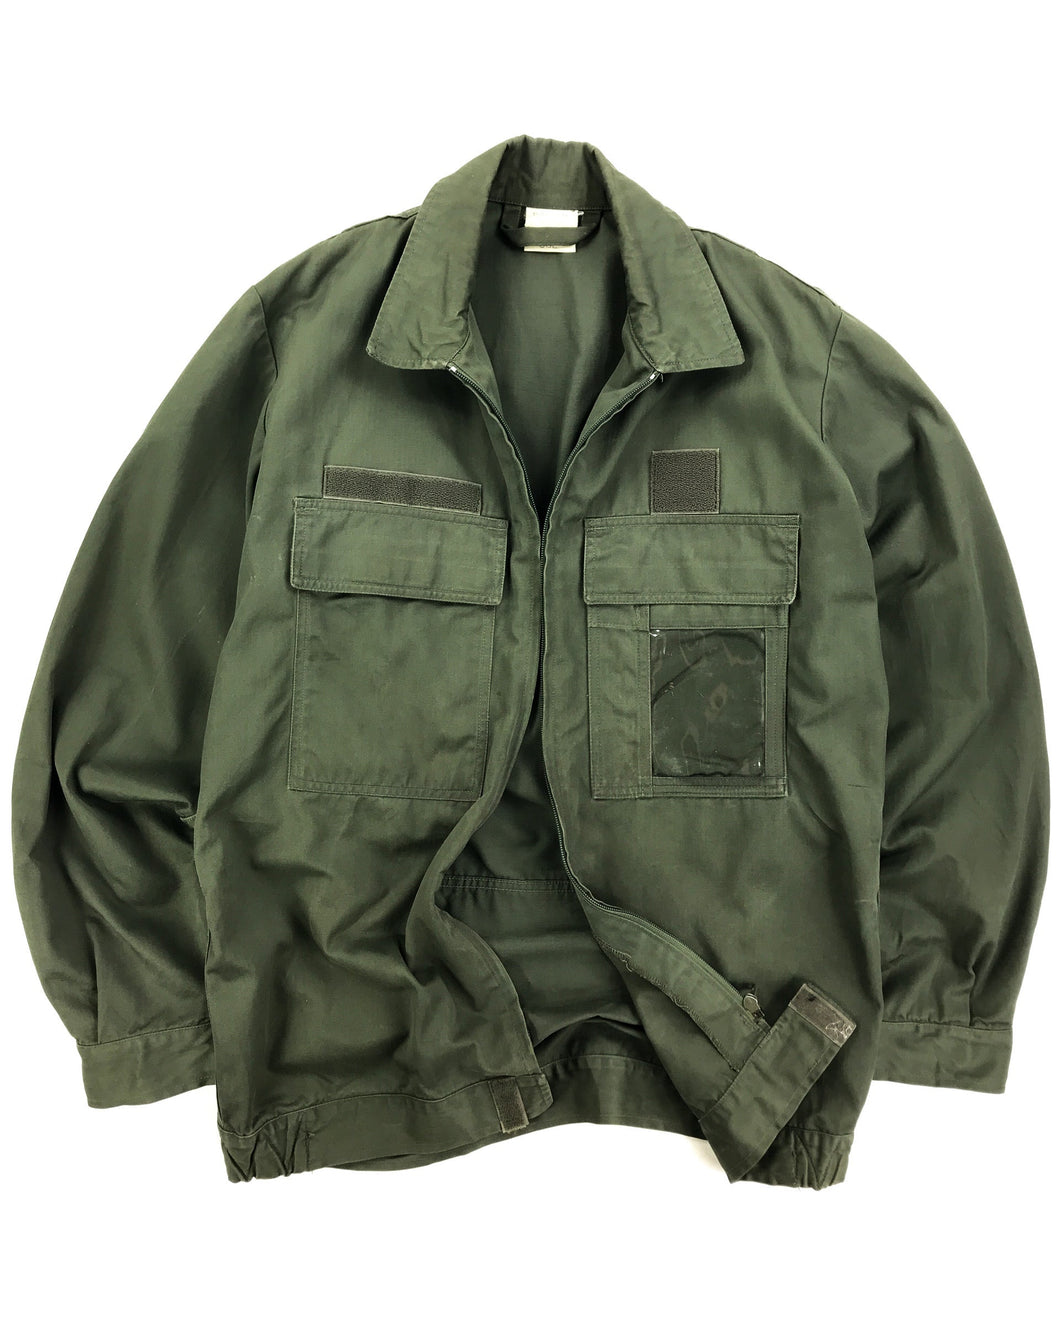 Copy of BALSAN FRENCH MILITARY I.D. Field Jacket (1980’s-90’s)(L)